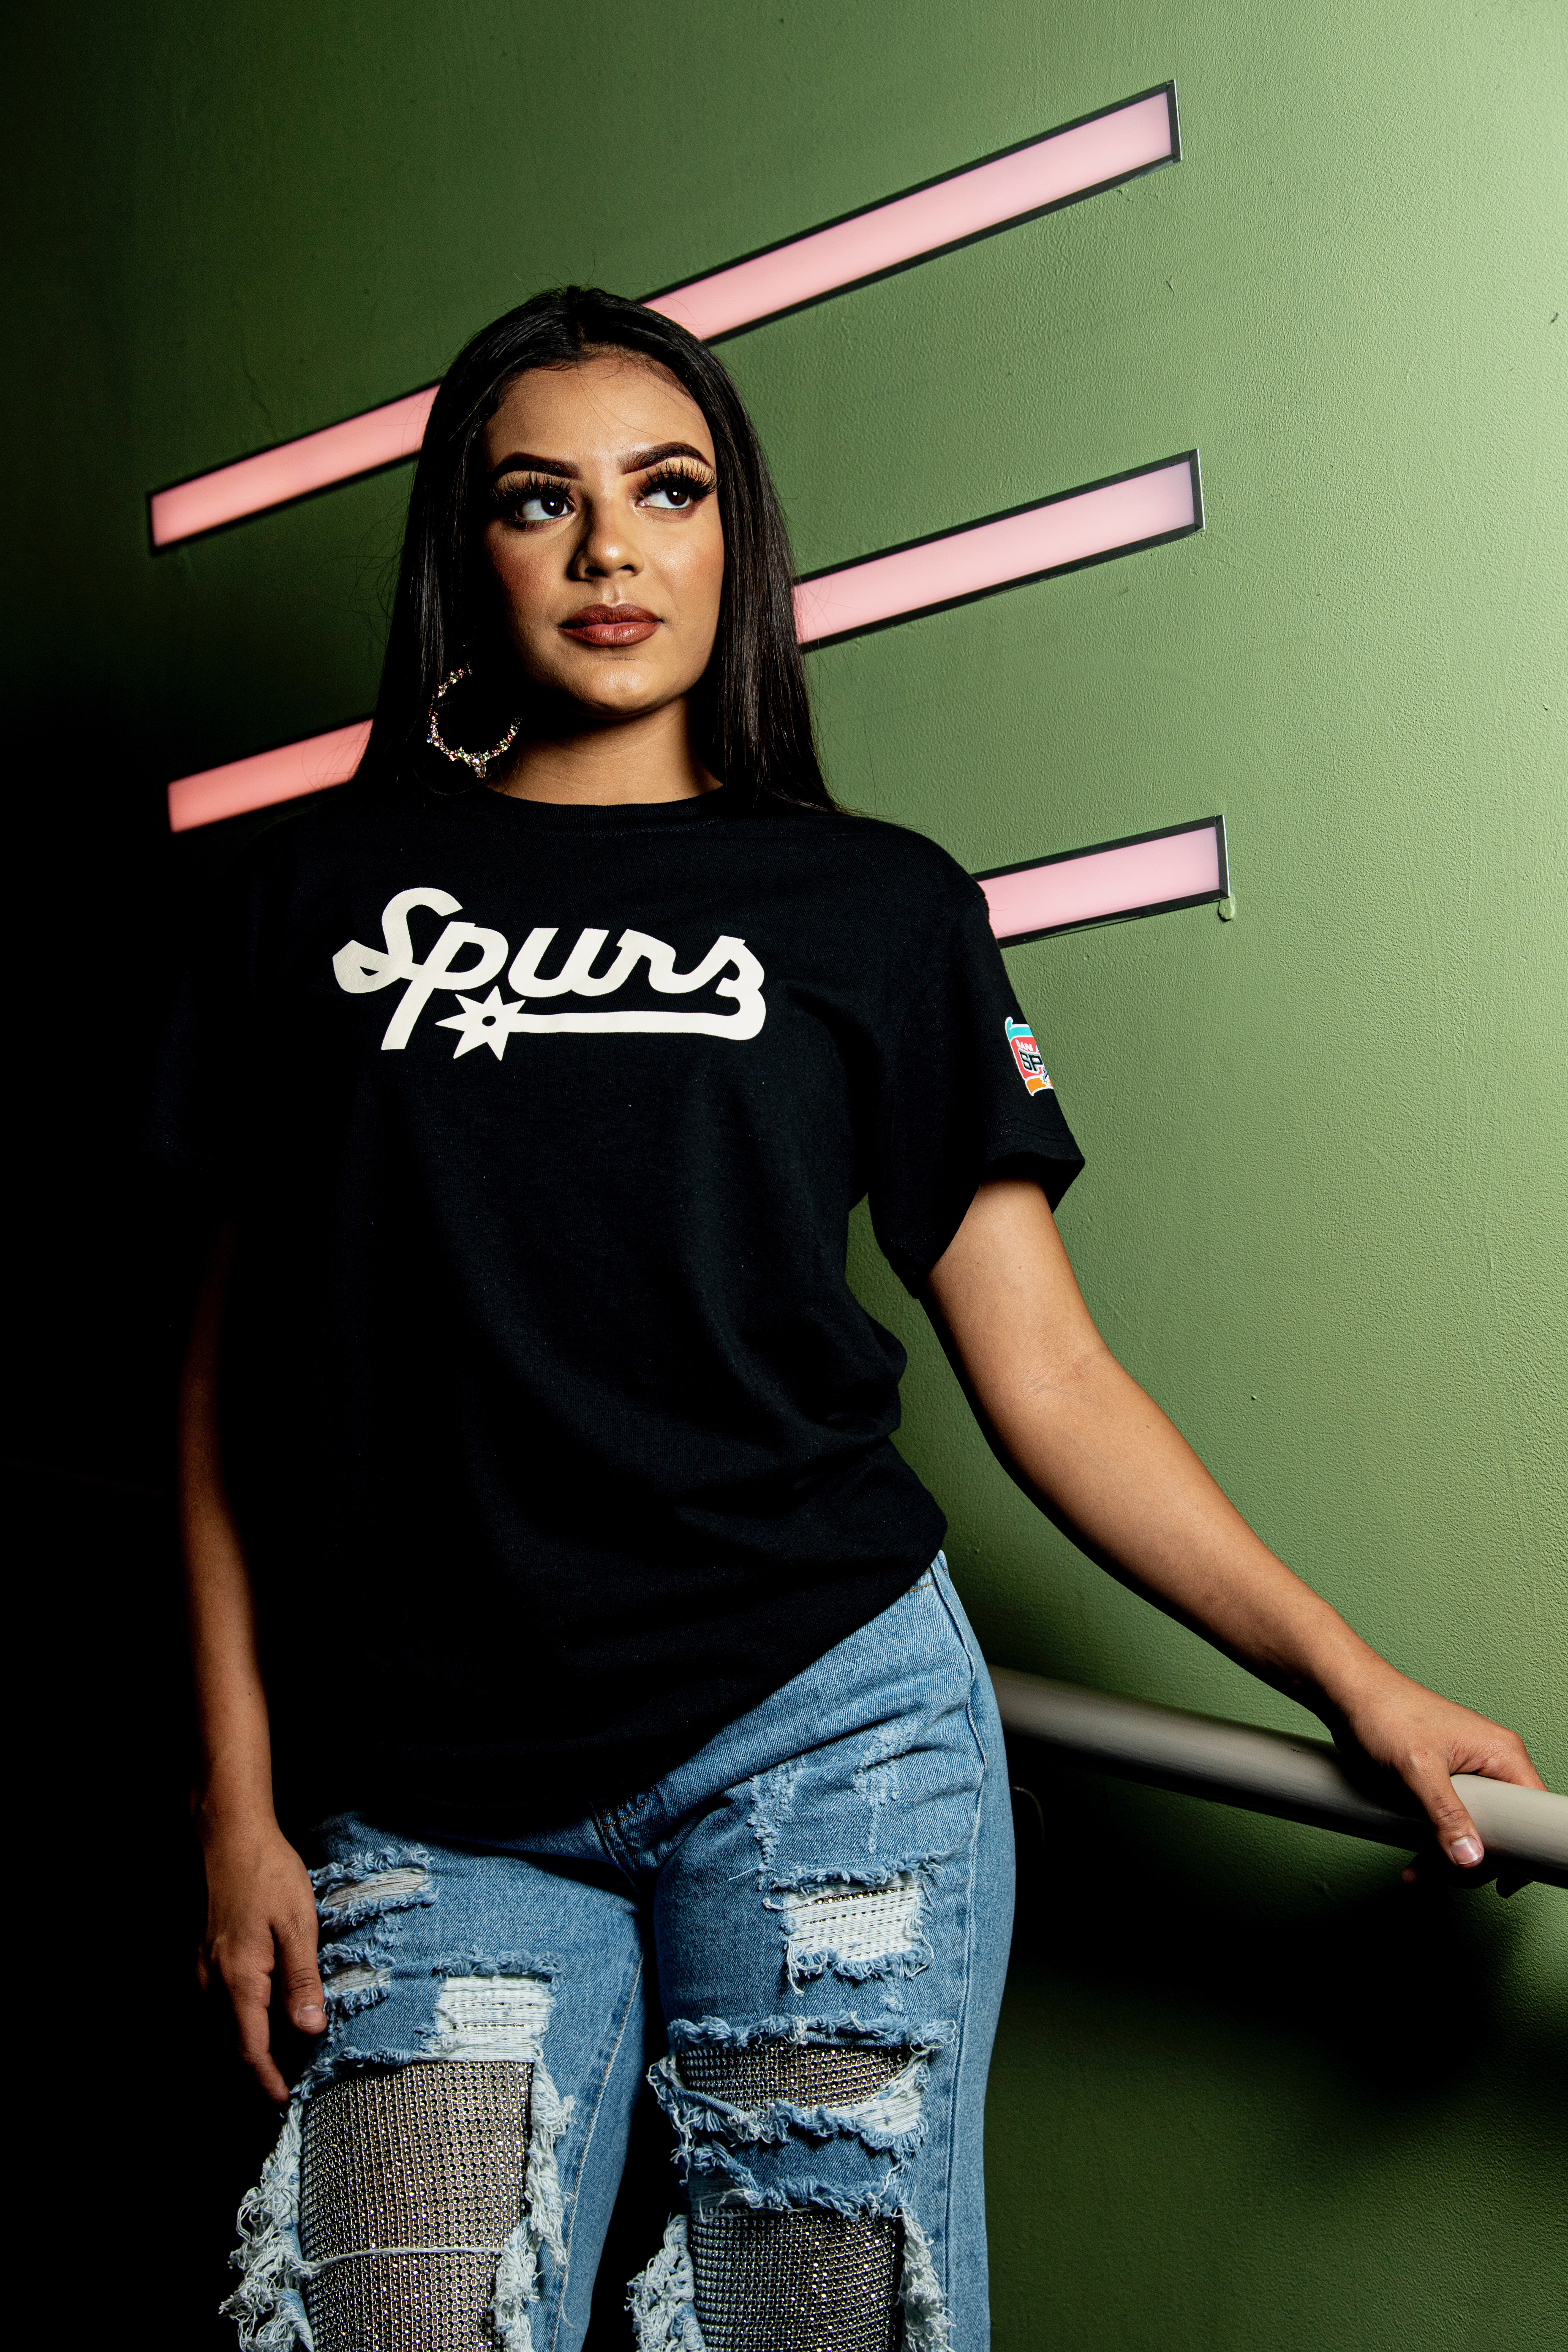 Spurs release new Fiesta-inspired, retro throwback apparel collection